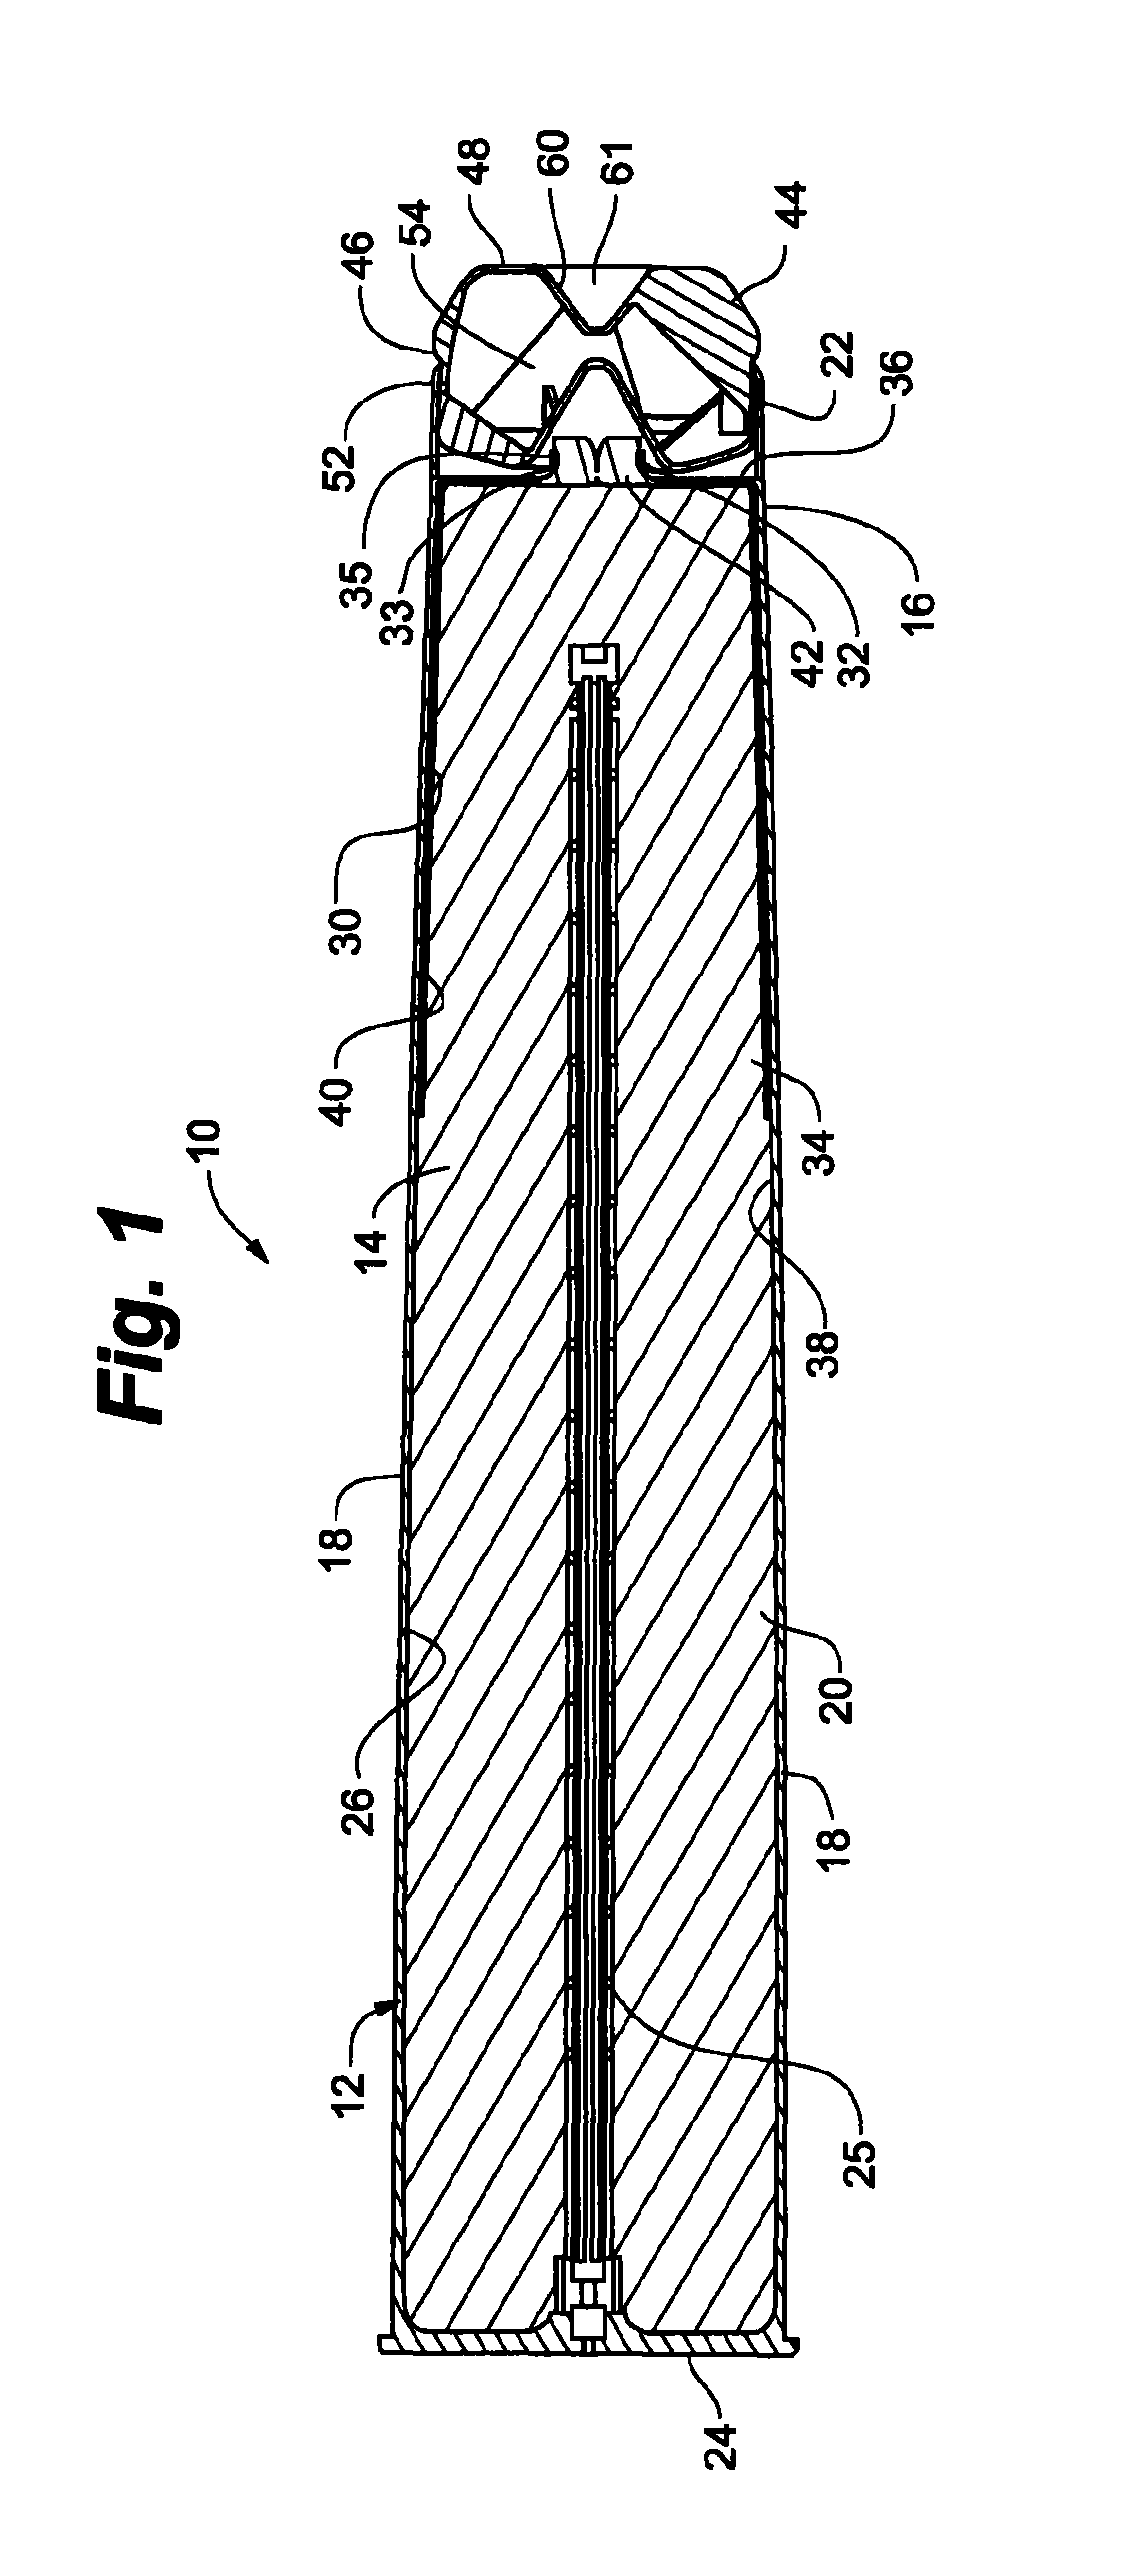 Cartridge assembly having an integrated retention system